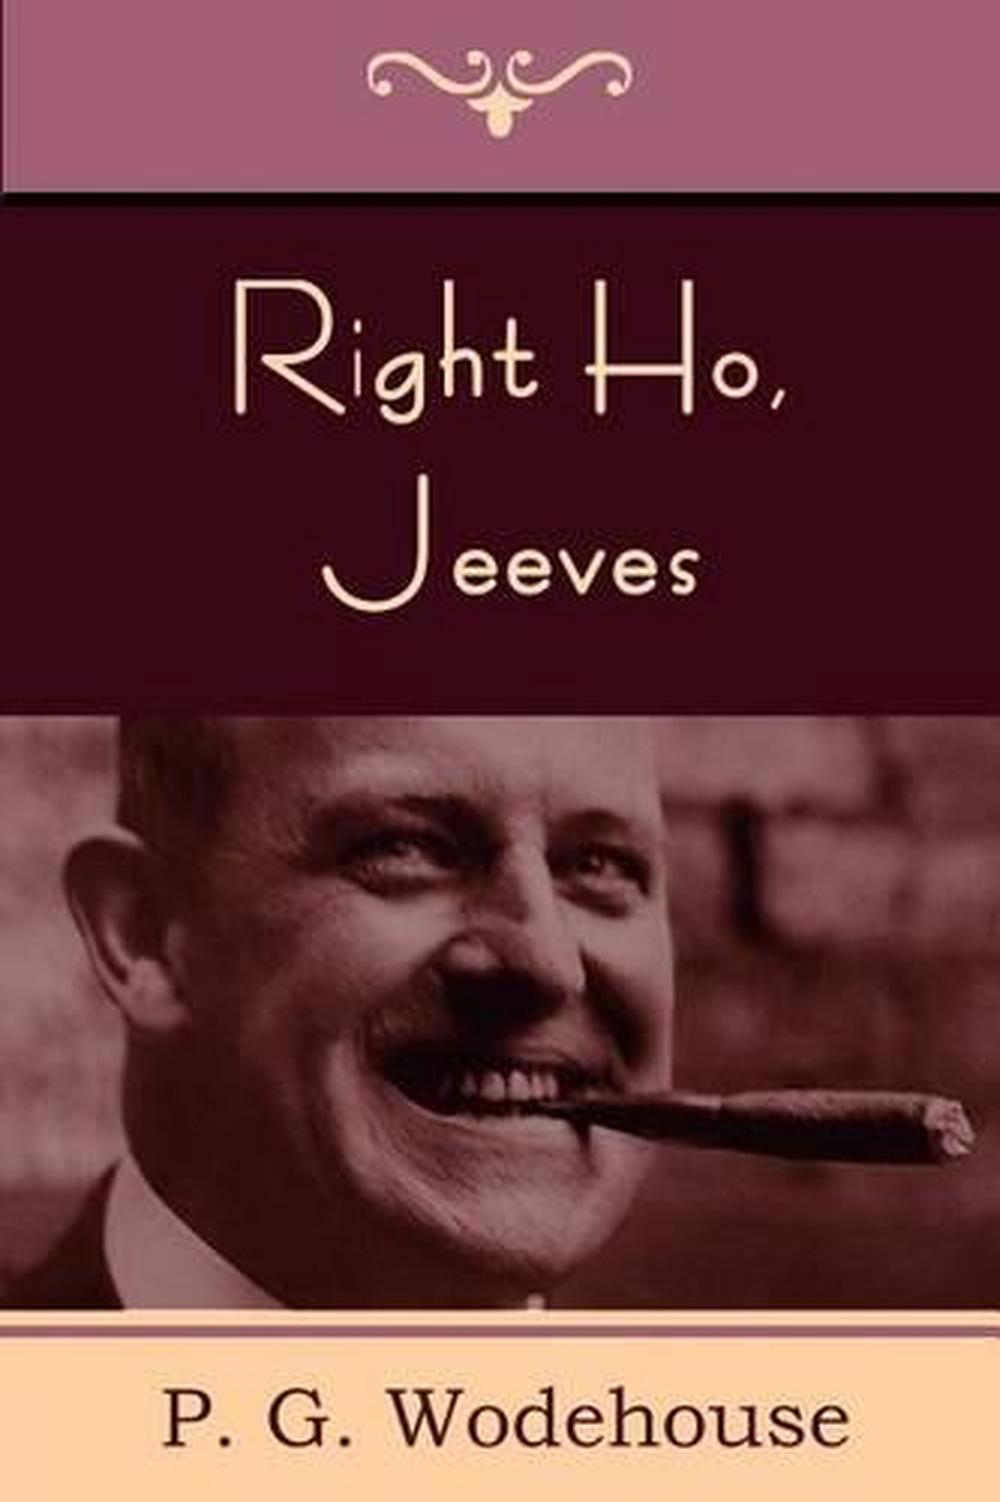 right ho jeeves book